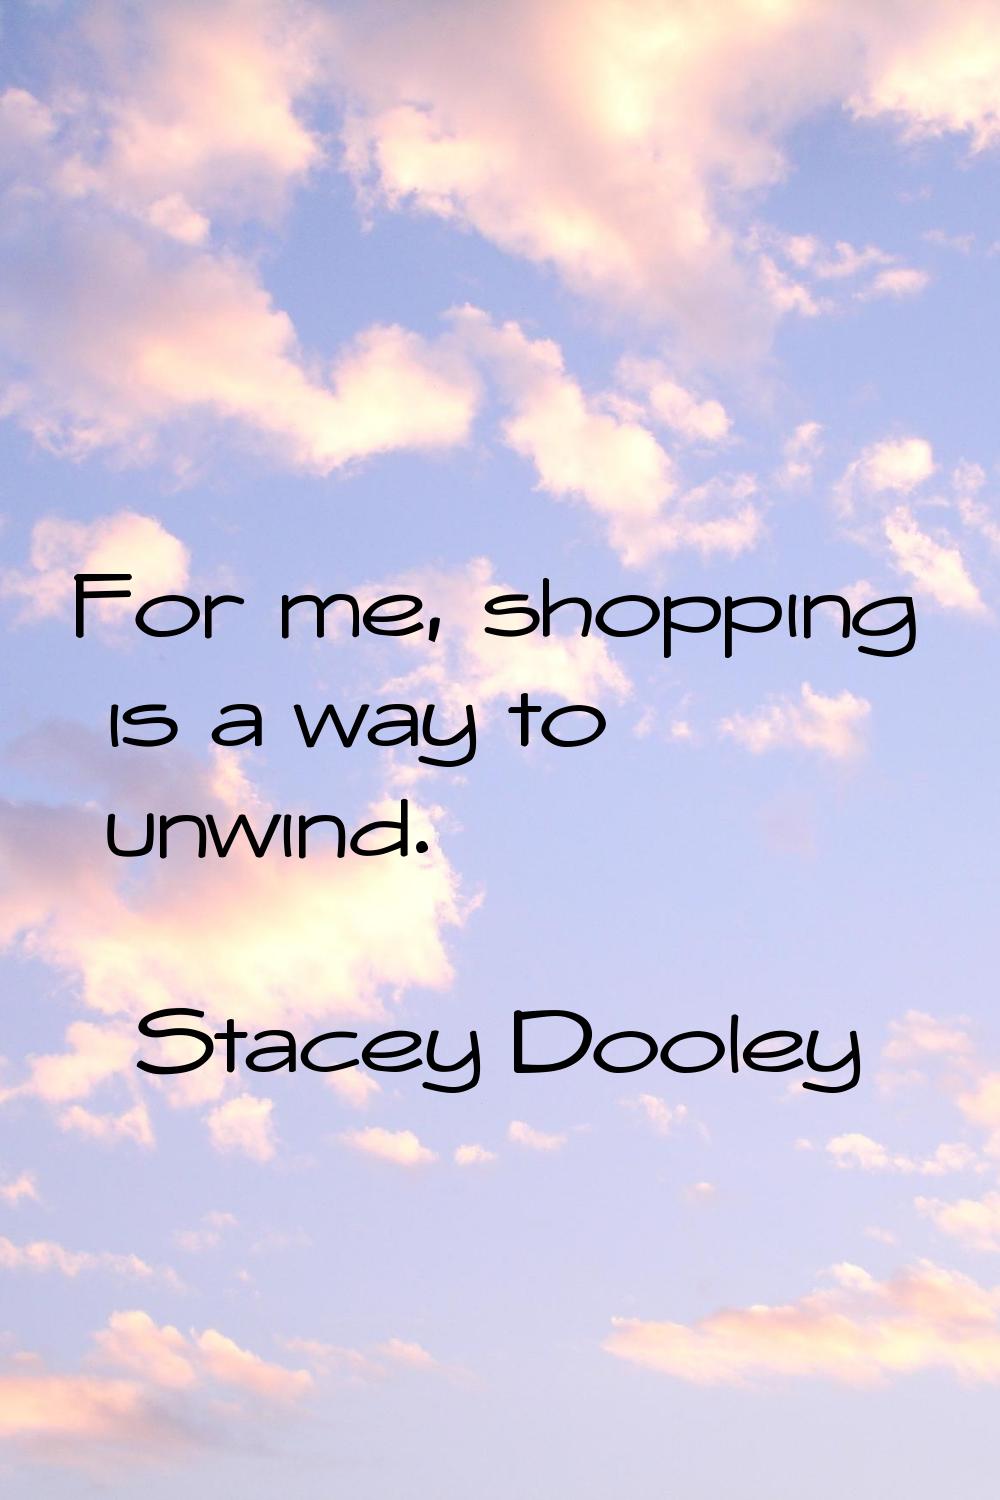 For me, shopping is a way to unwind.